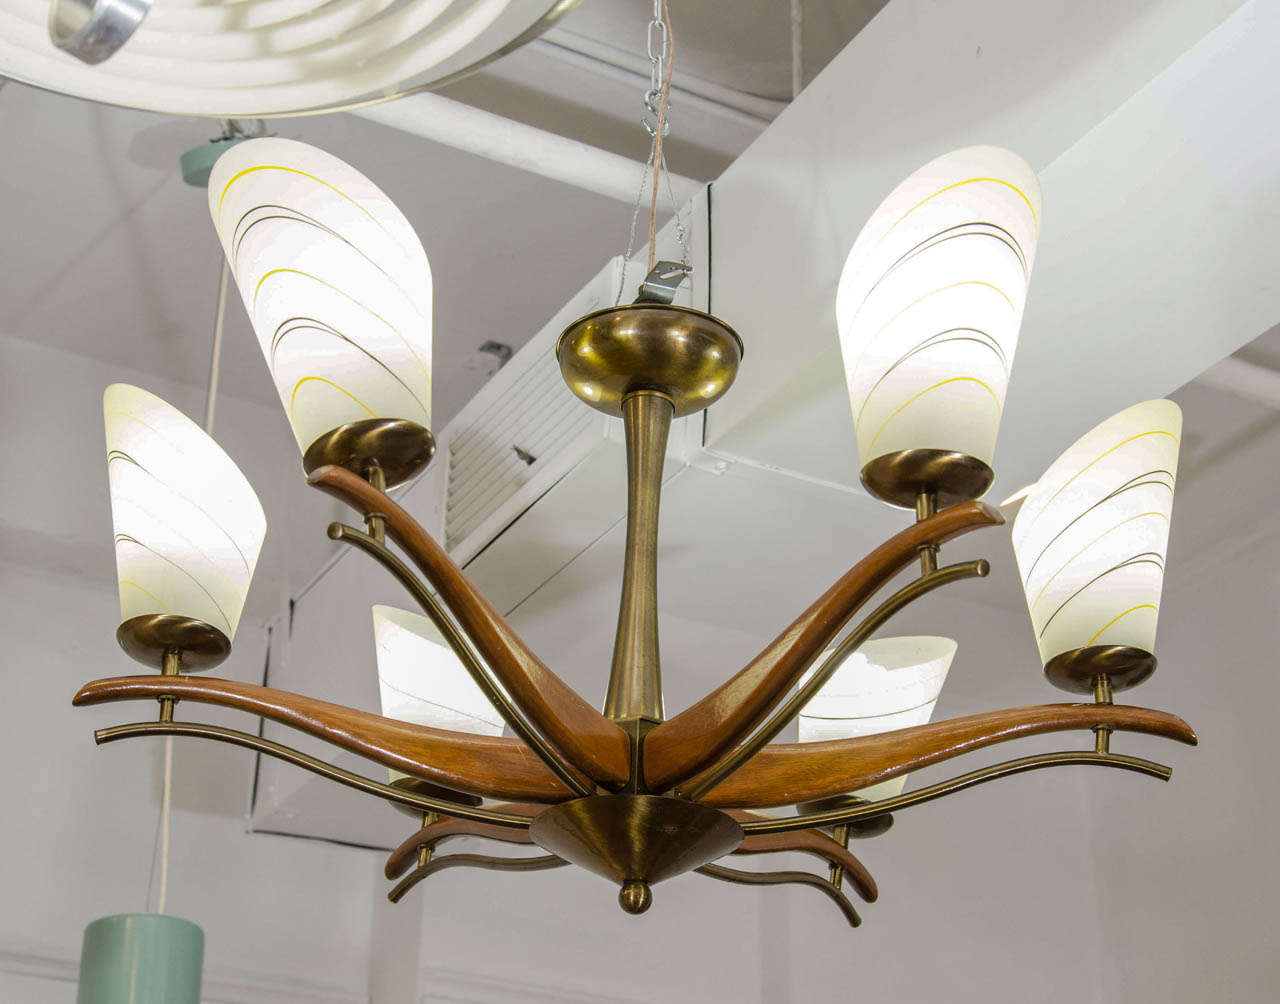 A vintage Italian chandelier with wooden arms accented by parallel brass elements. Central stem is brass. Slanted oval glass shades feature delicate gold and black detailing. Good vintage condition with age appropriate wear.